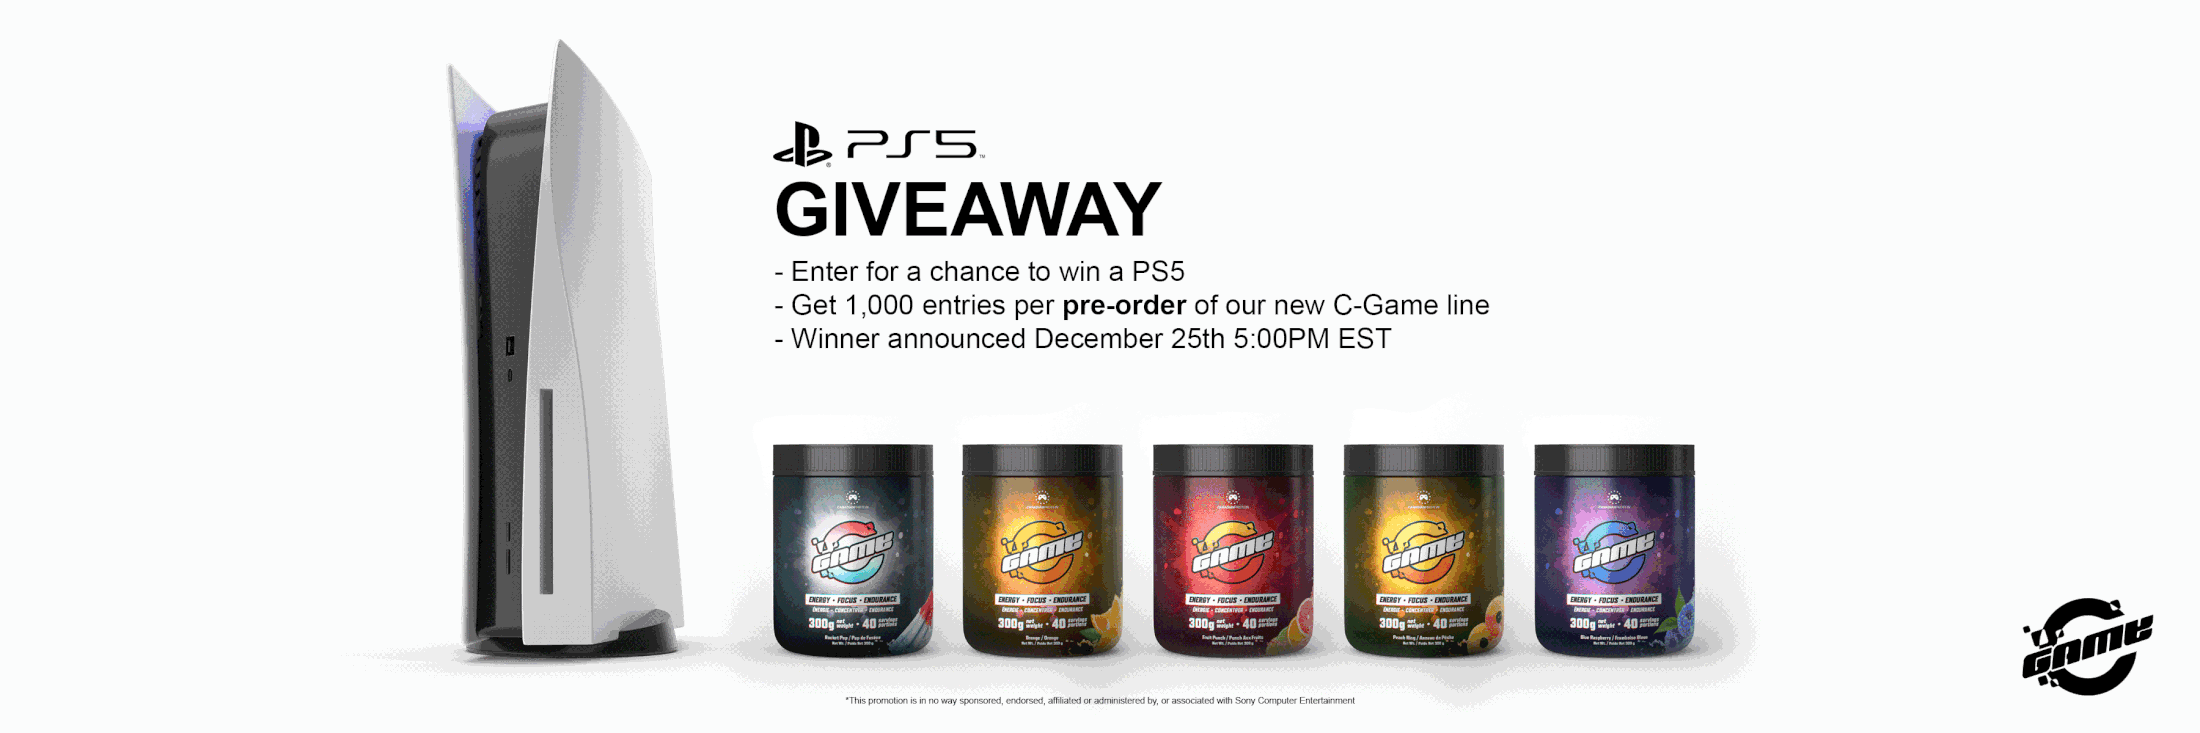 Introducing C-GAME and our PS5 Giveaway